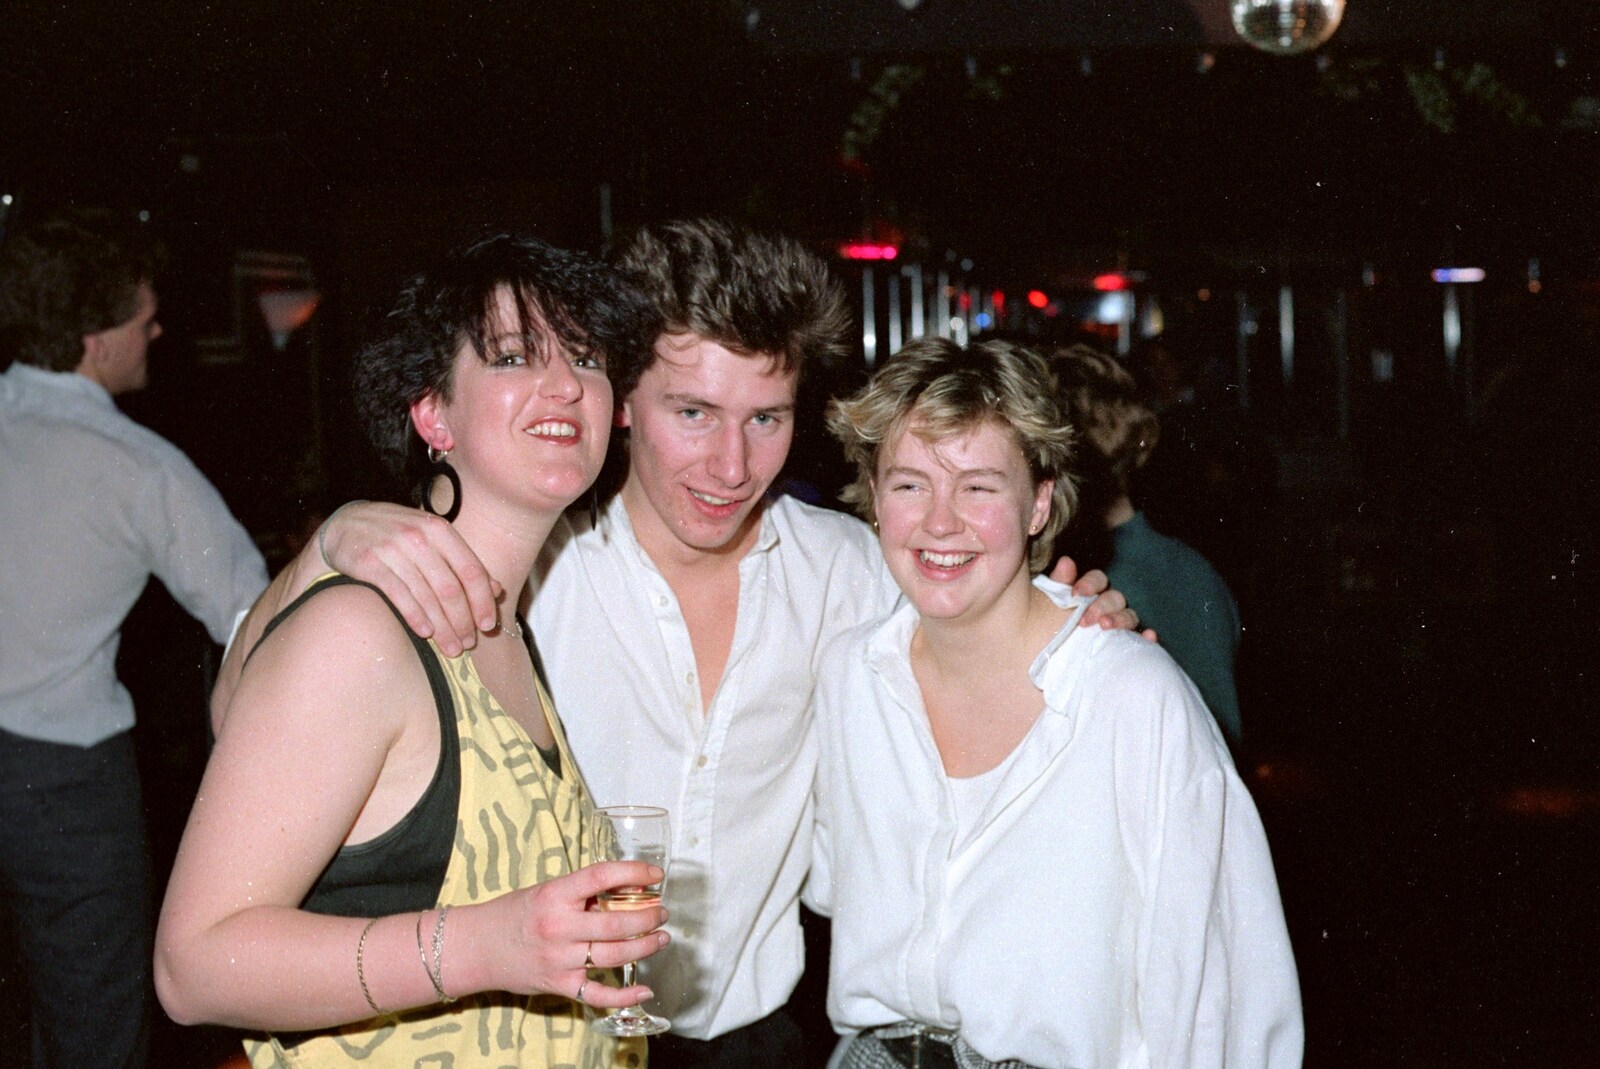 His 'n' hers open shirts from Uni: A Party in Snobs Nightclub, Mayflower Street, Plymouth - 18th October 1986